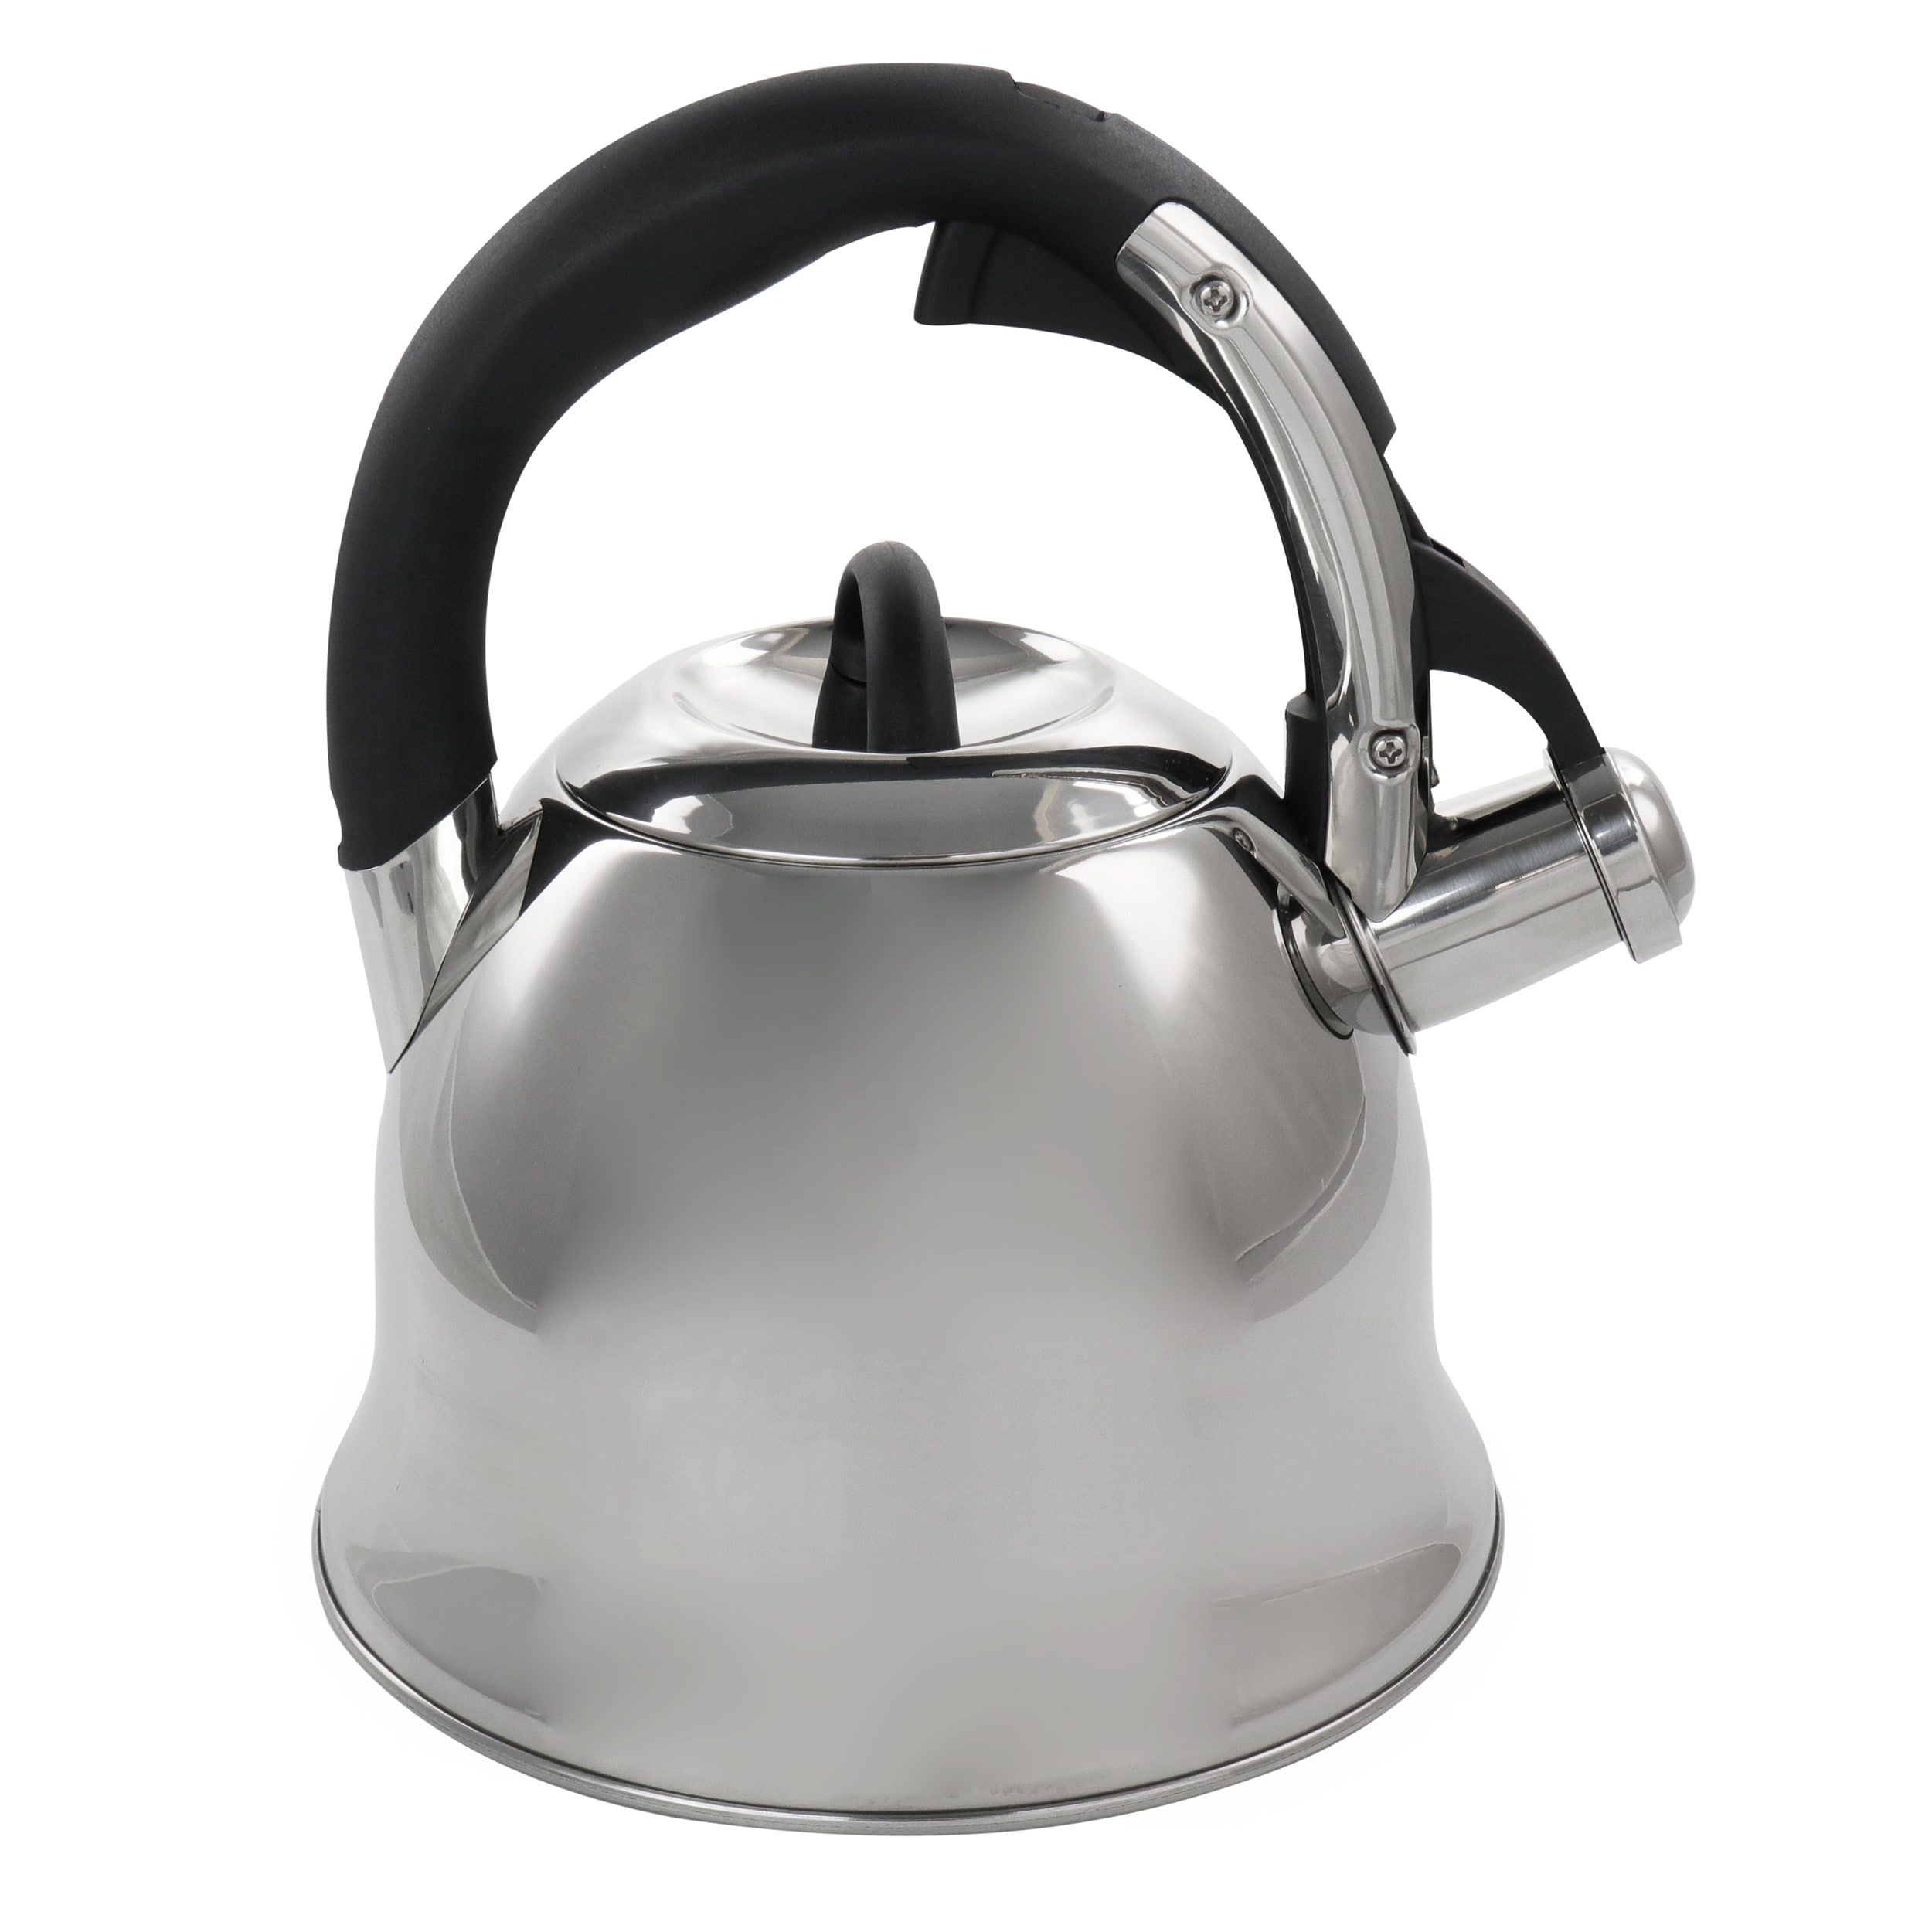 https://ak1.ostkcdn.com/images/products/is/images/direct/4becf172b8c76df601e586ab15065b1f15a0cddc/Mr.-Coffee-Coffield-1.8Qt-Stainless-Steel-Whistling-Tea-Kettle.jpg